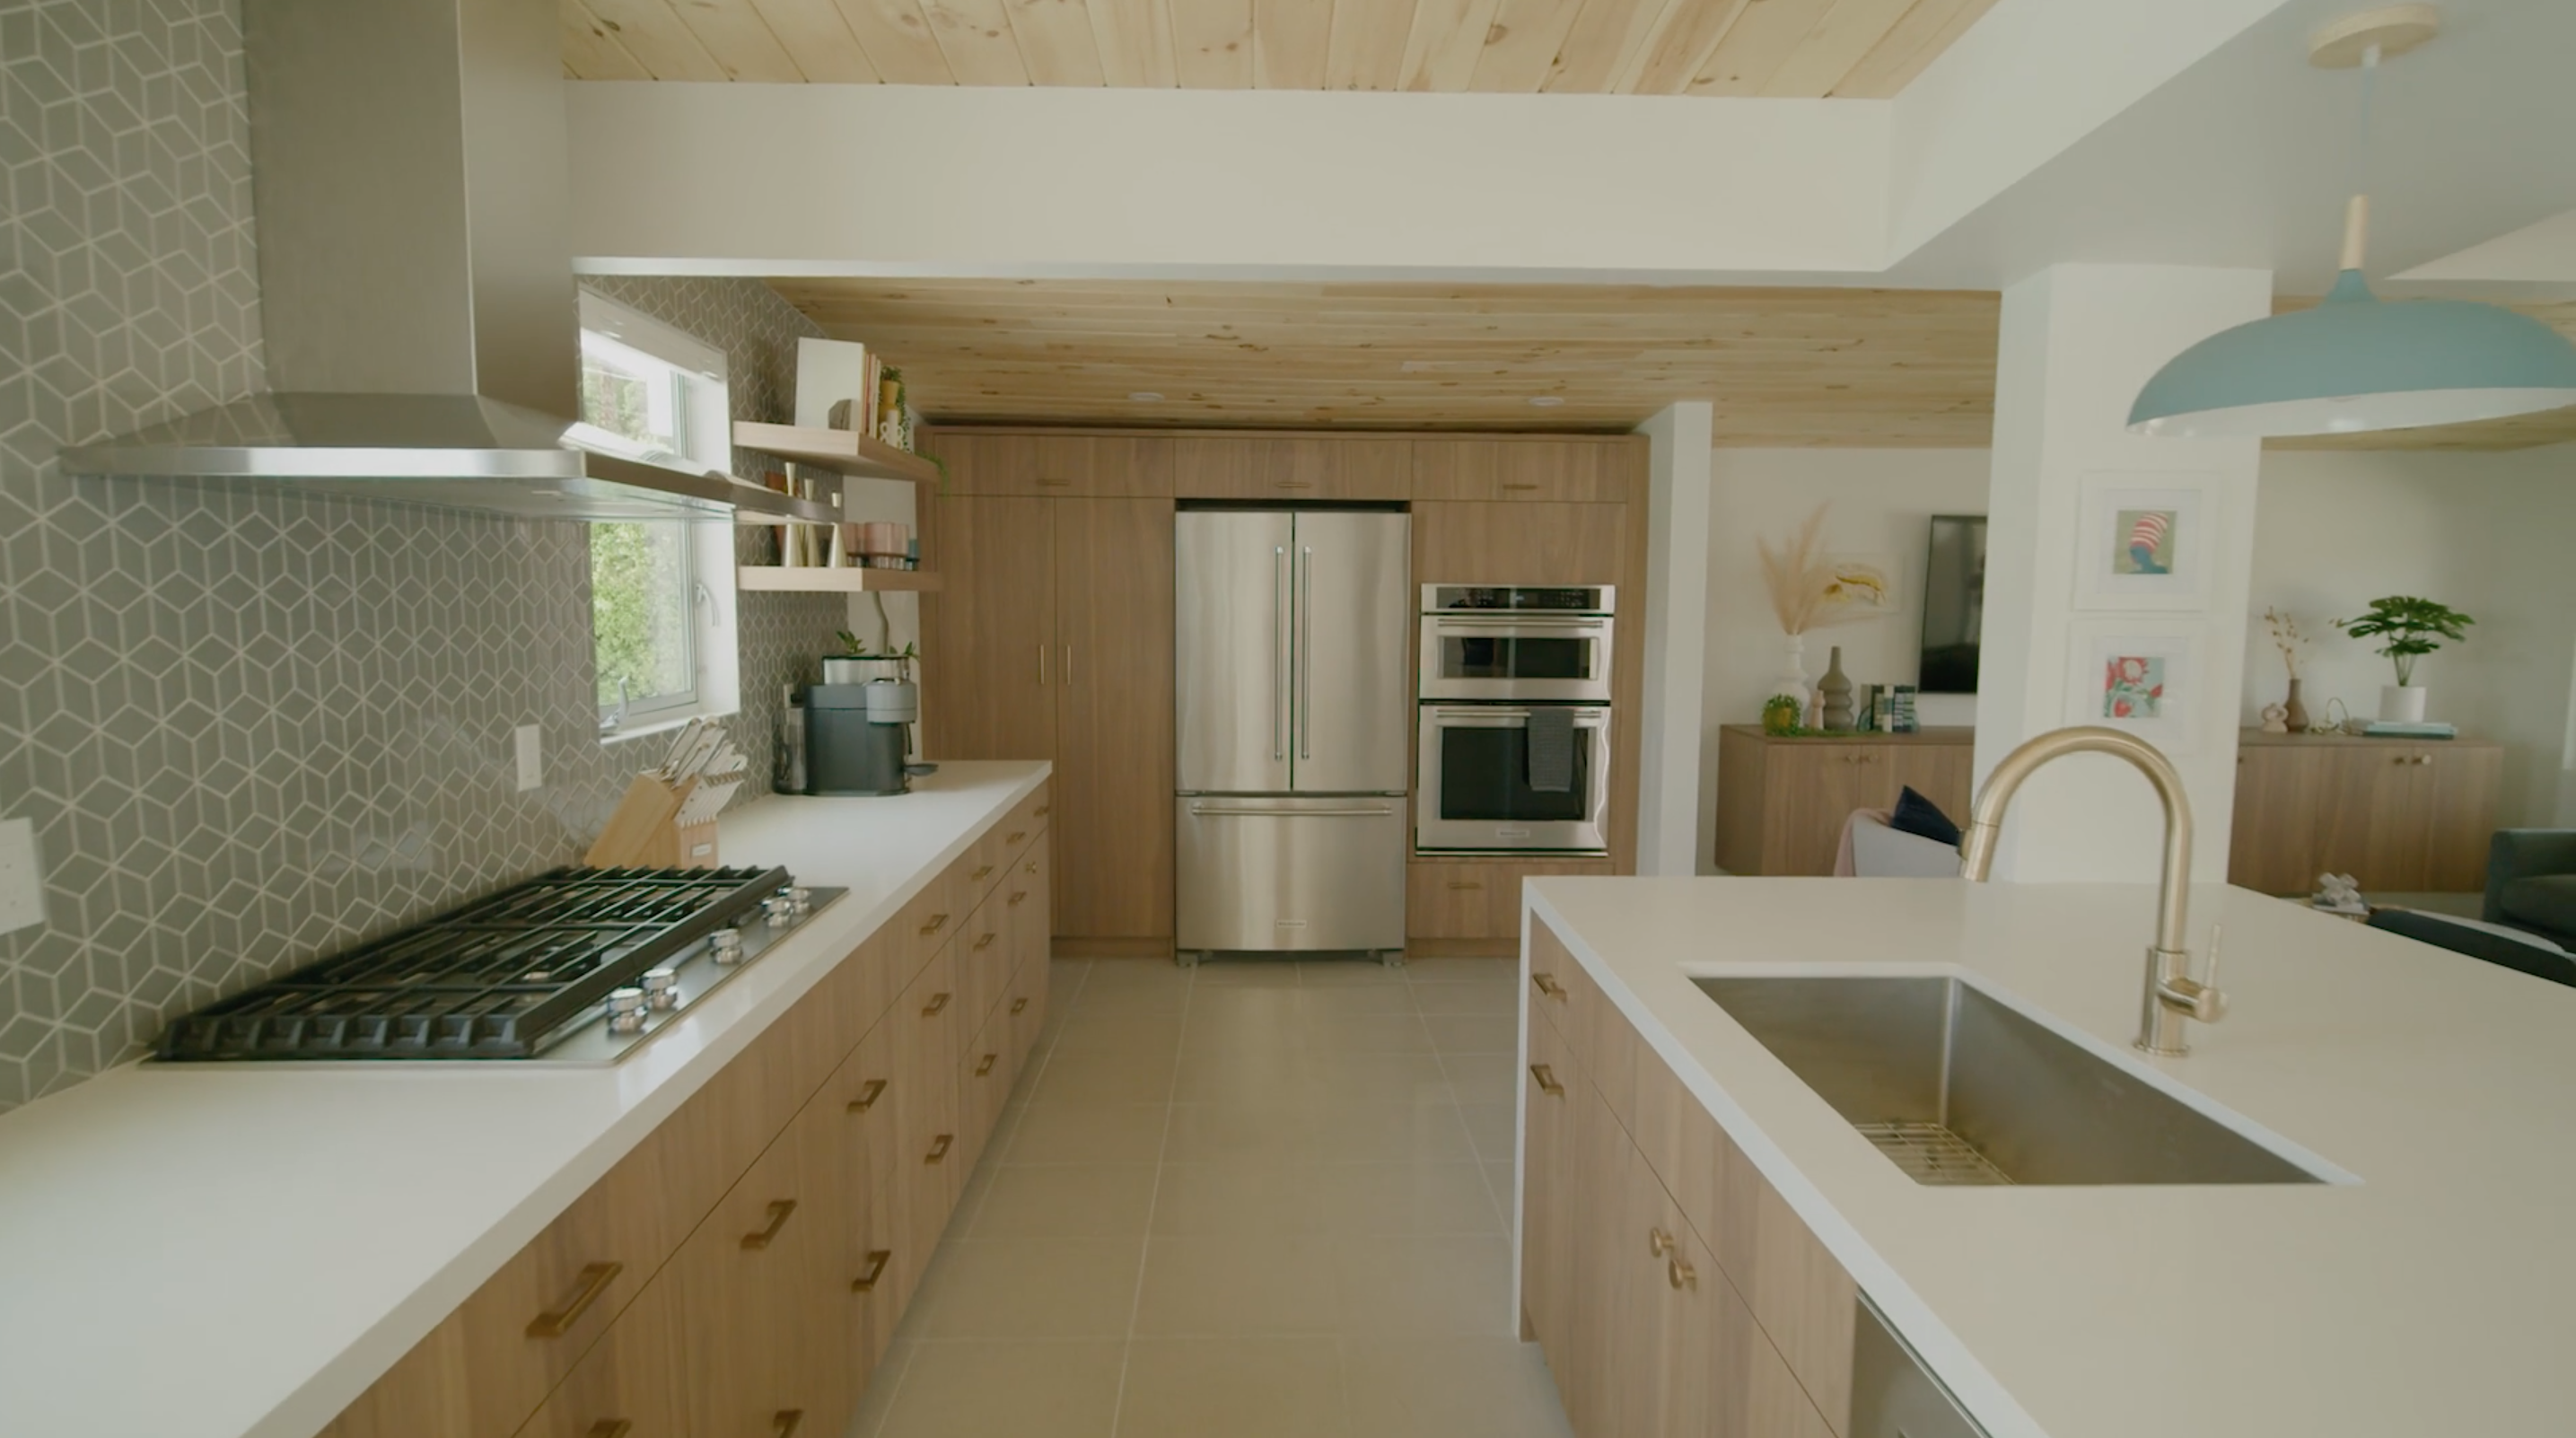 kitchen with white counters and wood on ceiling